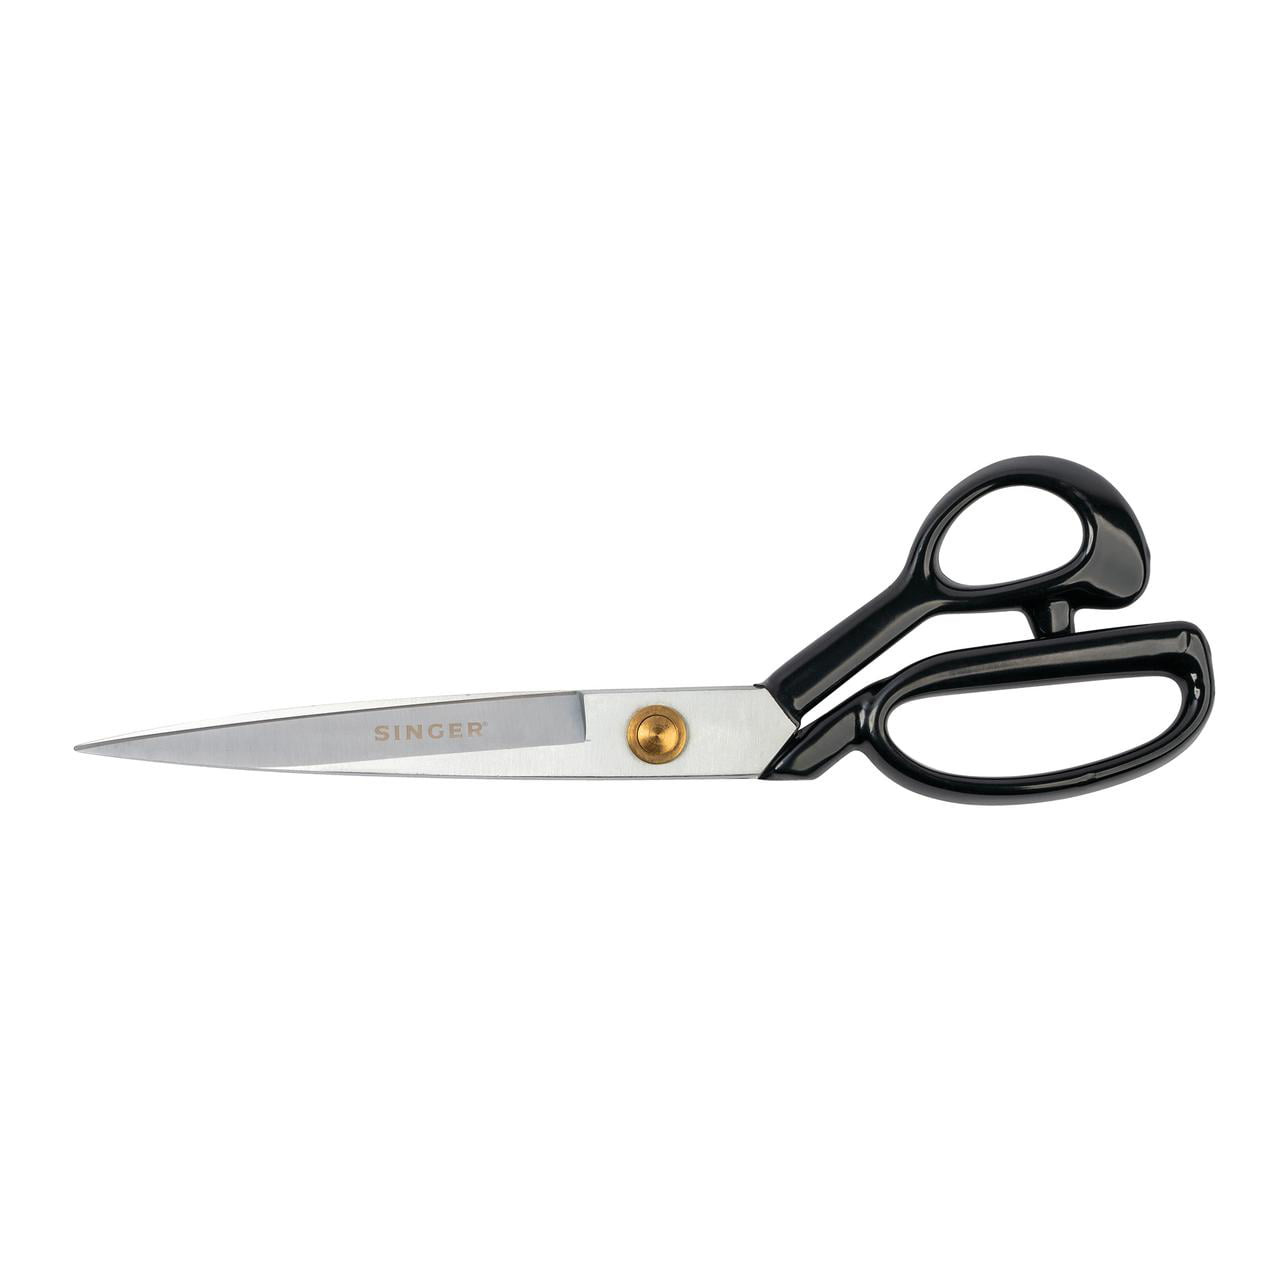 Heavy-Duty Extra Long Large Home/Office Utility Scissors, 12-Inch Upholstery Tailor Shears, 4.5-Inch Crane Embroidery Sewing Crafting Scissors, Stain